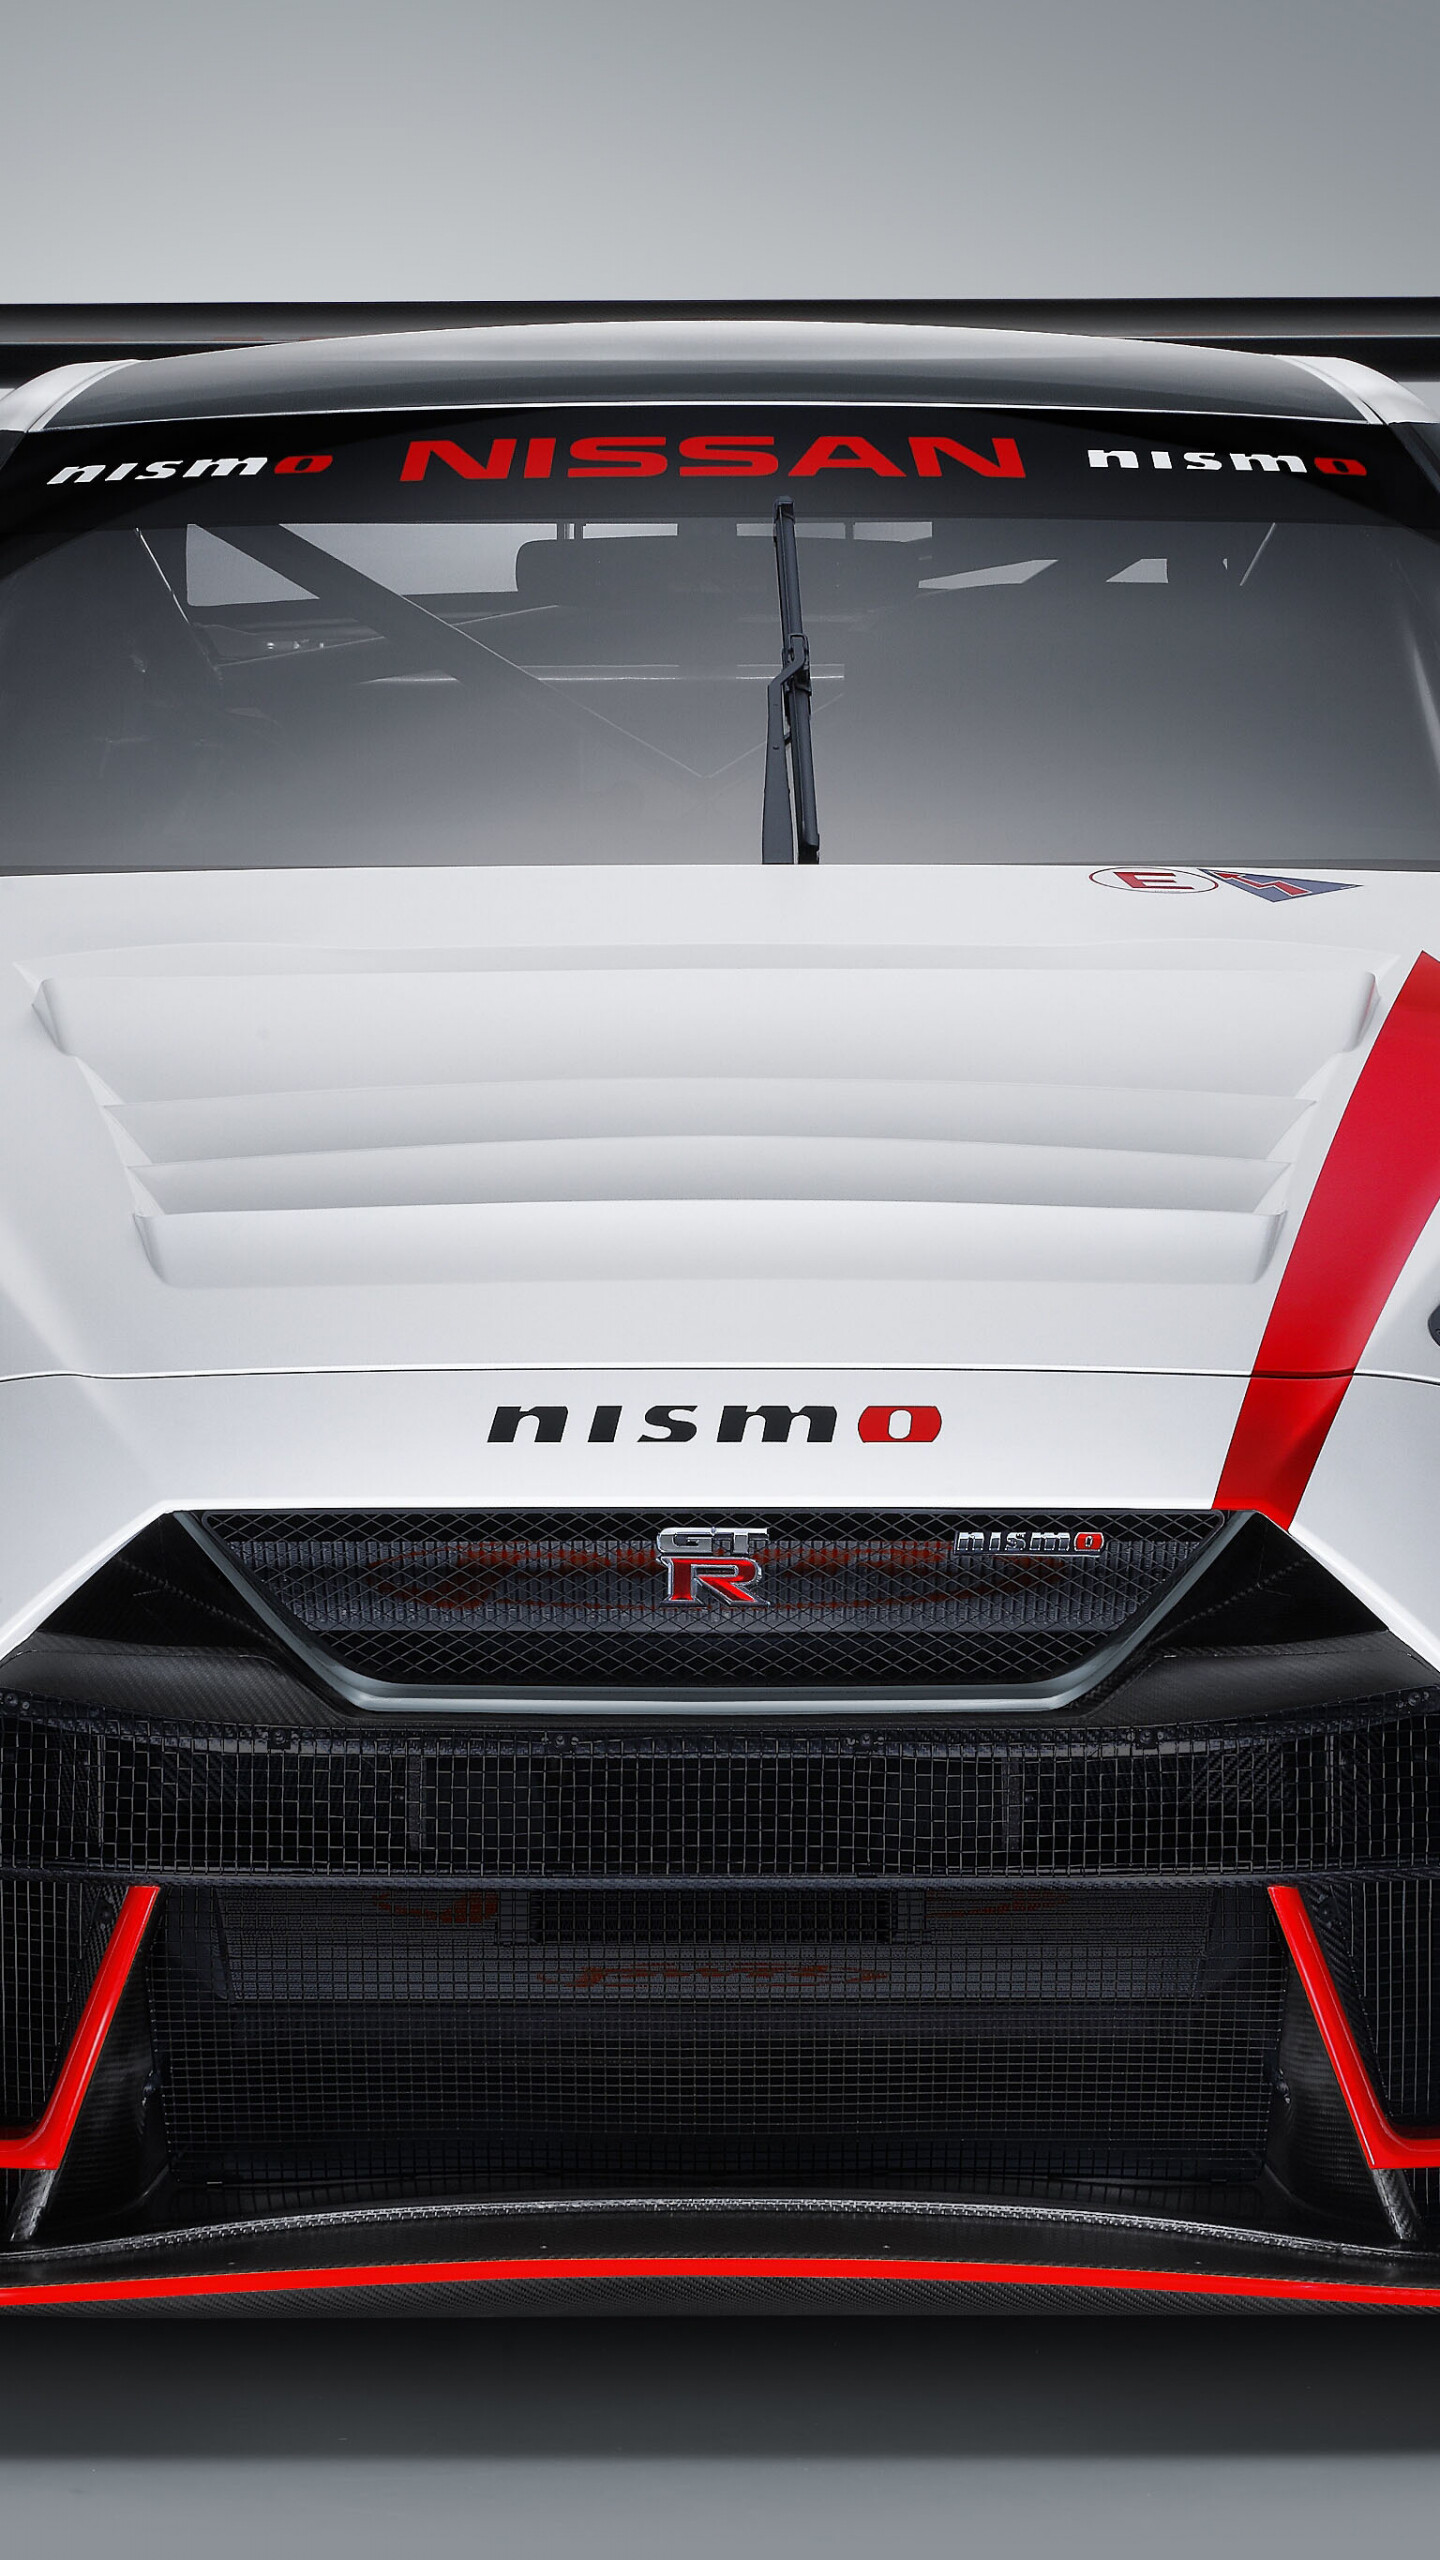 Nissan: GT-R NISMO GT3, Nismo's new race car developed in line with FIA GT3 regulations. 1440x2560 HD Wallpaper.